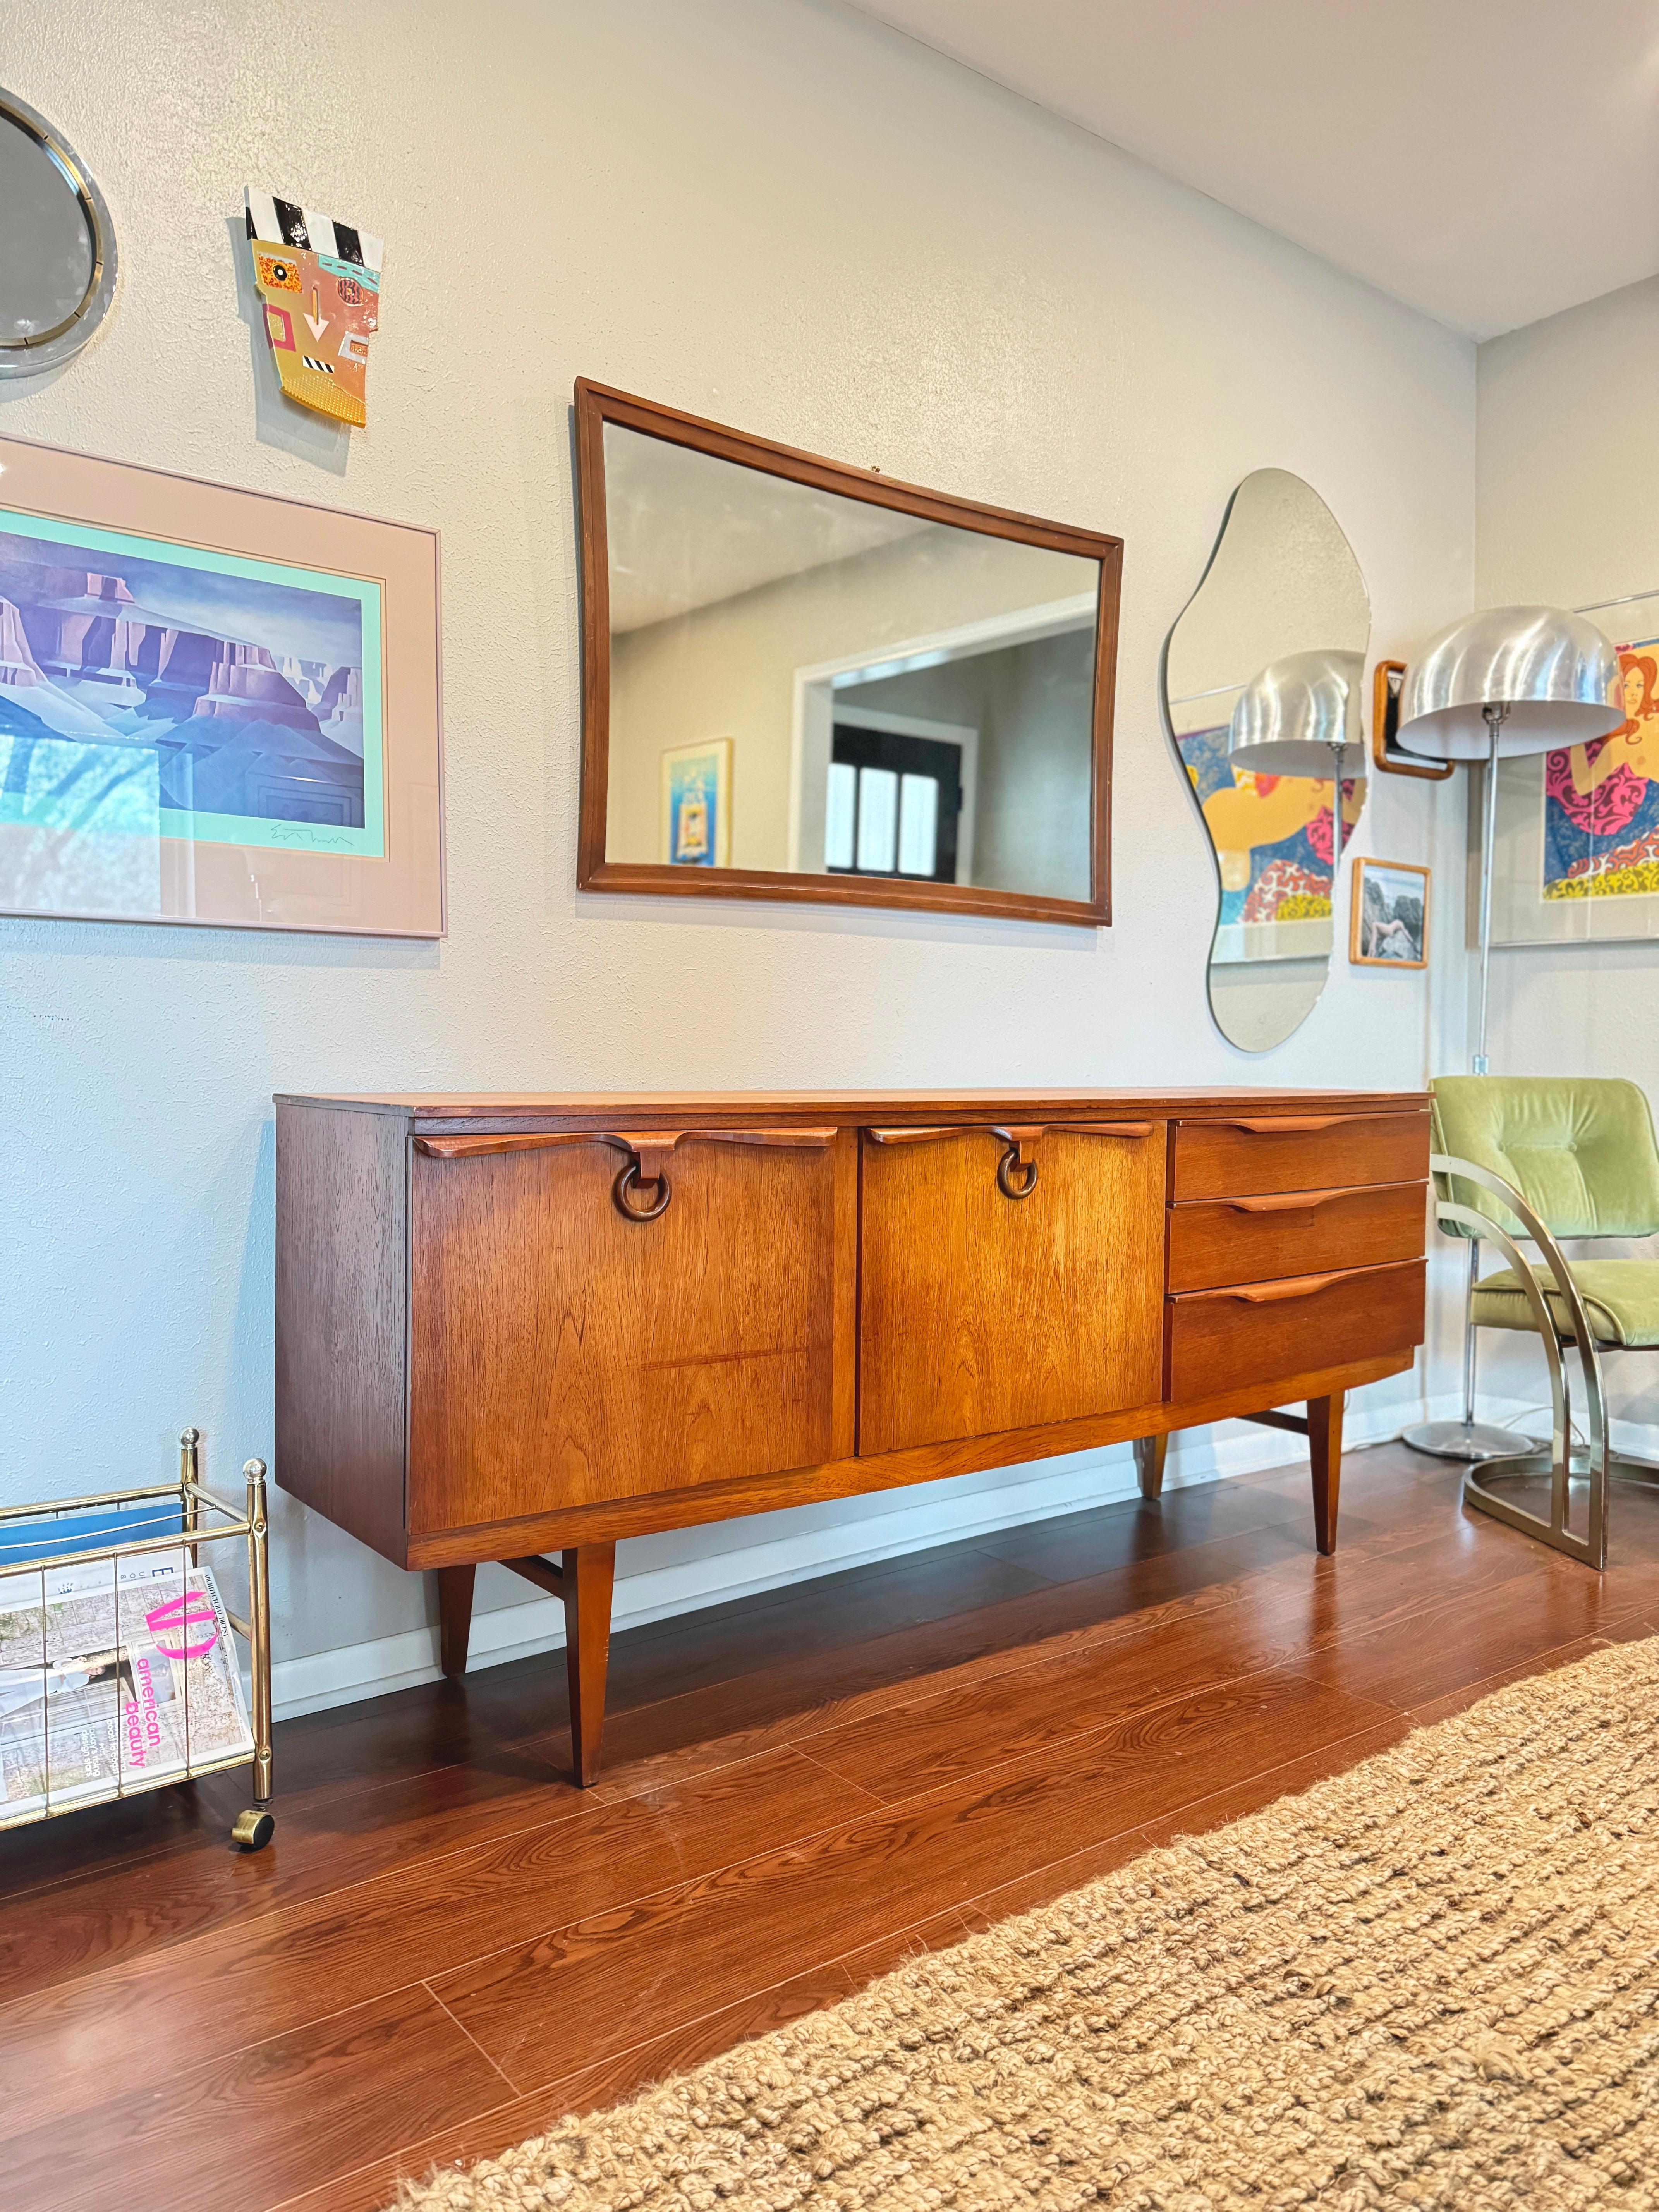 A mid century modern teak sideboard by Beautility, circa 1960s. This lovely sideboard features three drawers, one swinging door with two shelves, and a drop down door. With its sculptural elements, from the wooden ring pulls, tapered legs, and